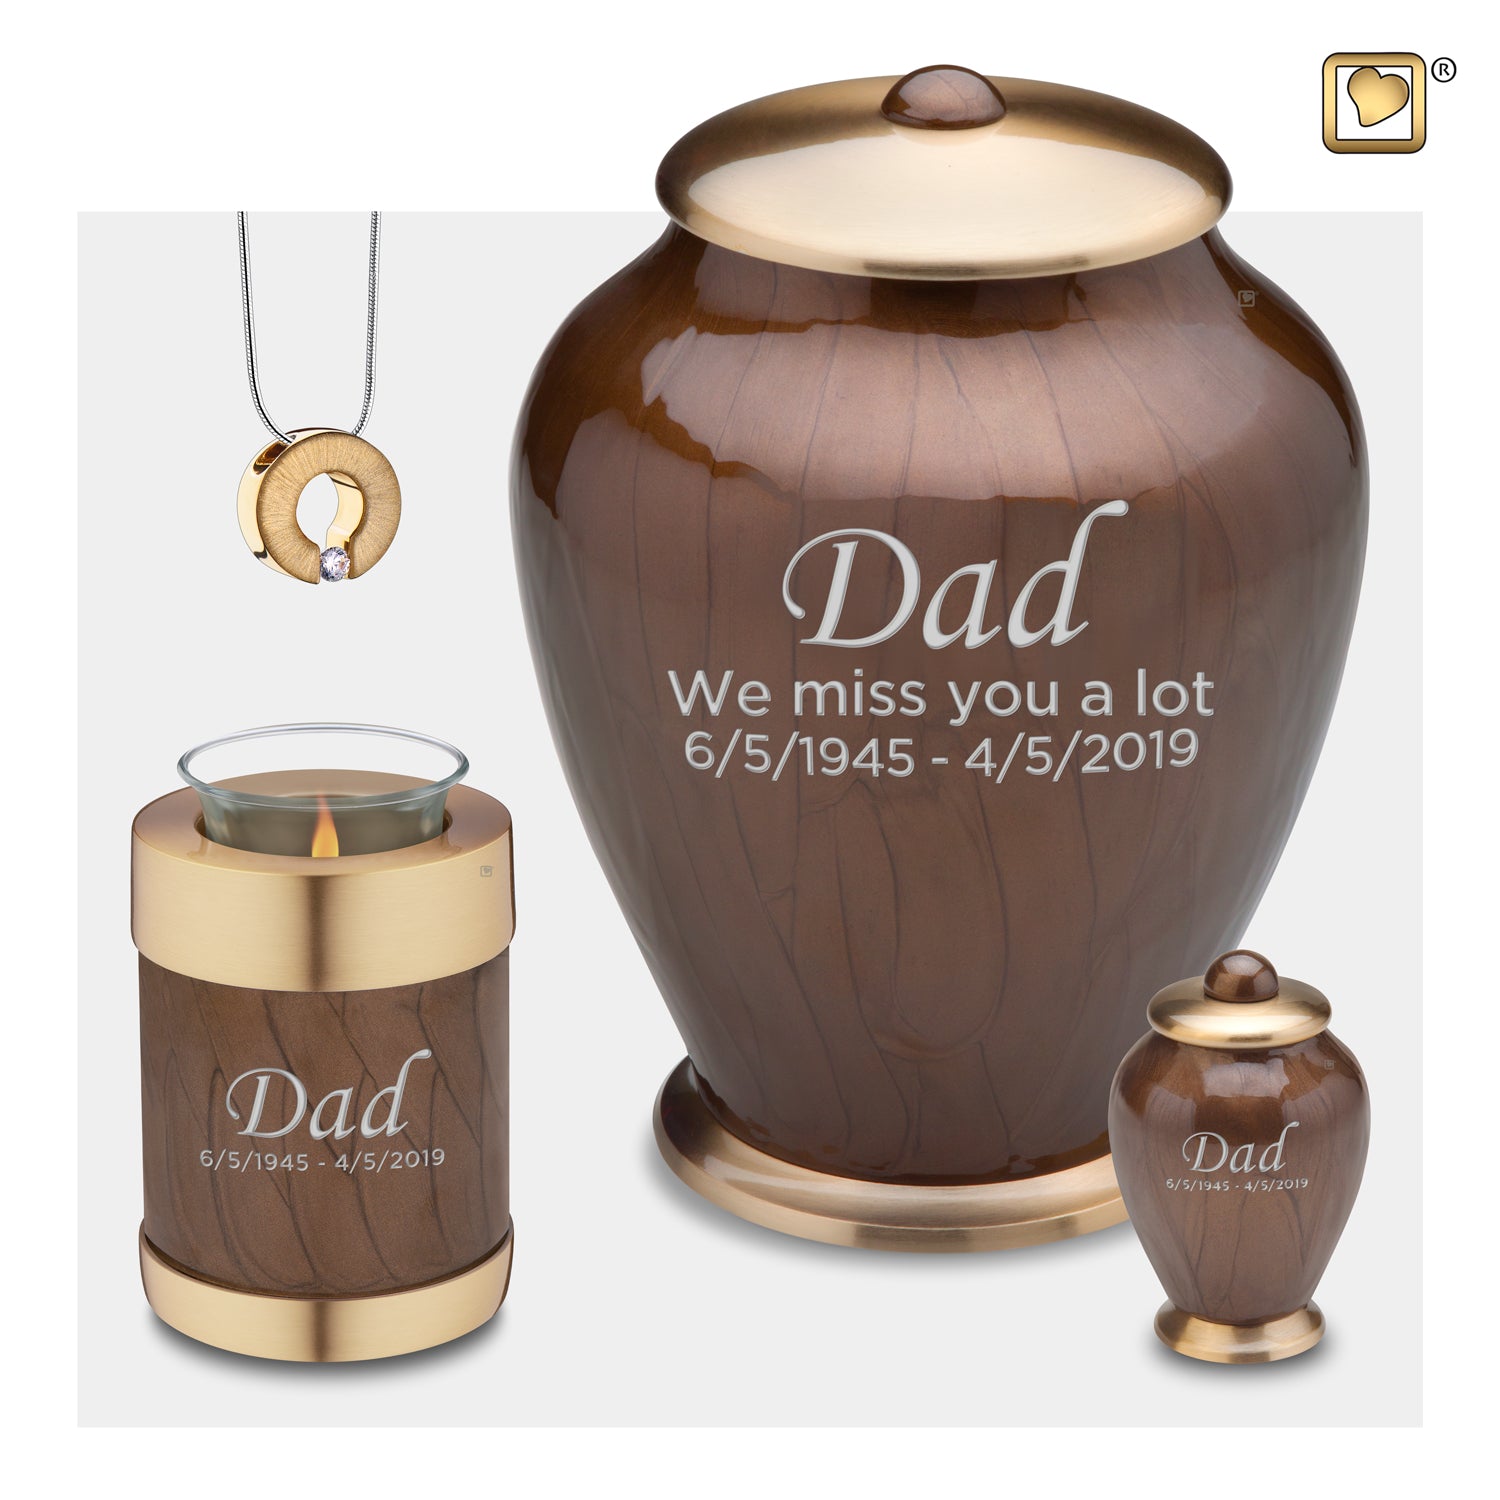 Adult Tall Simplicity Bronze Cremation Urn